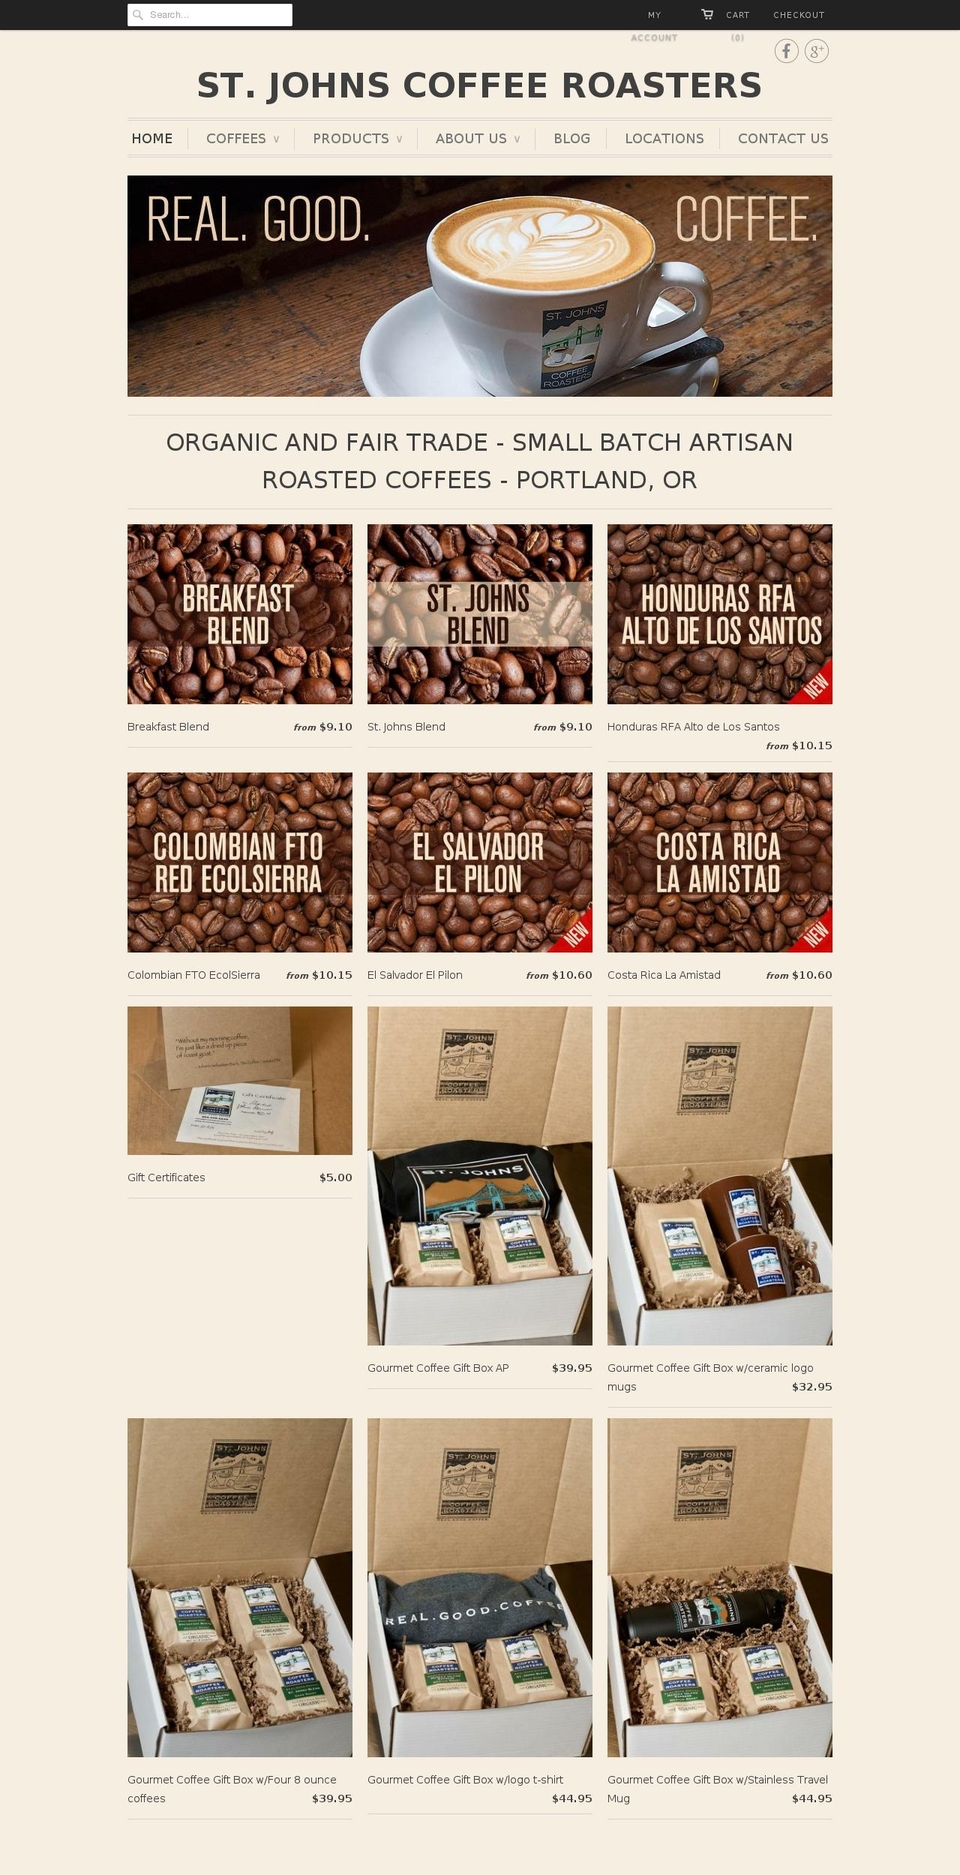 Express Shopify theme site example stjohnscoffee.com